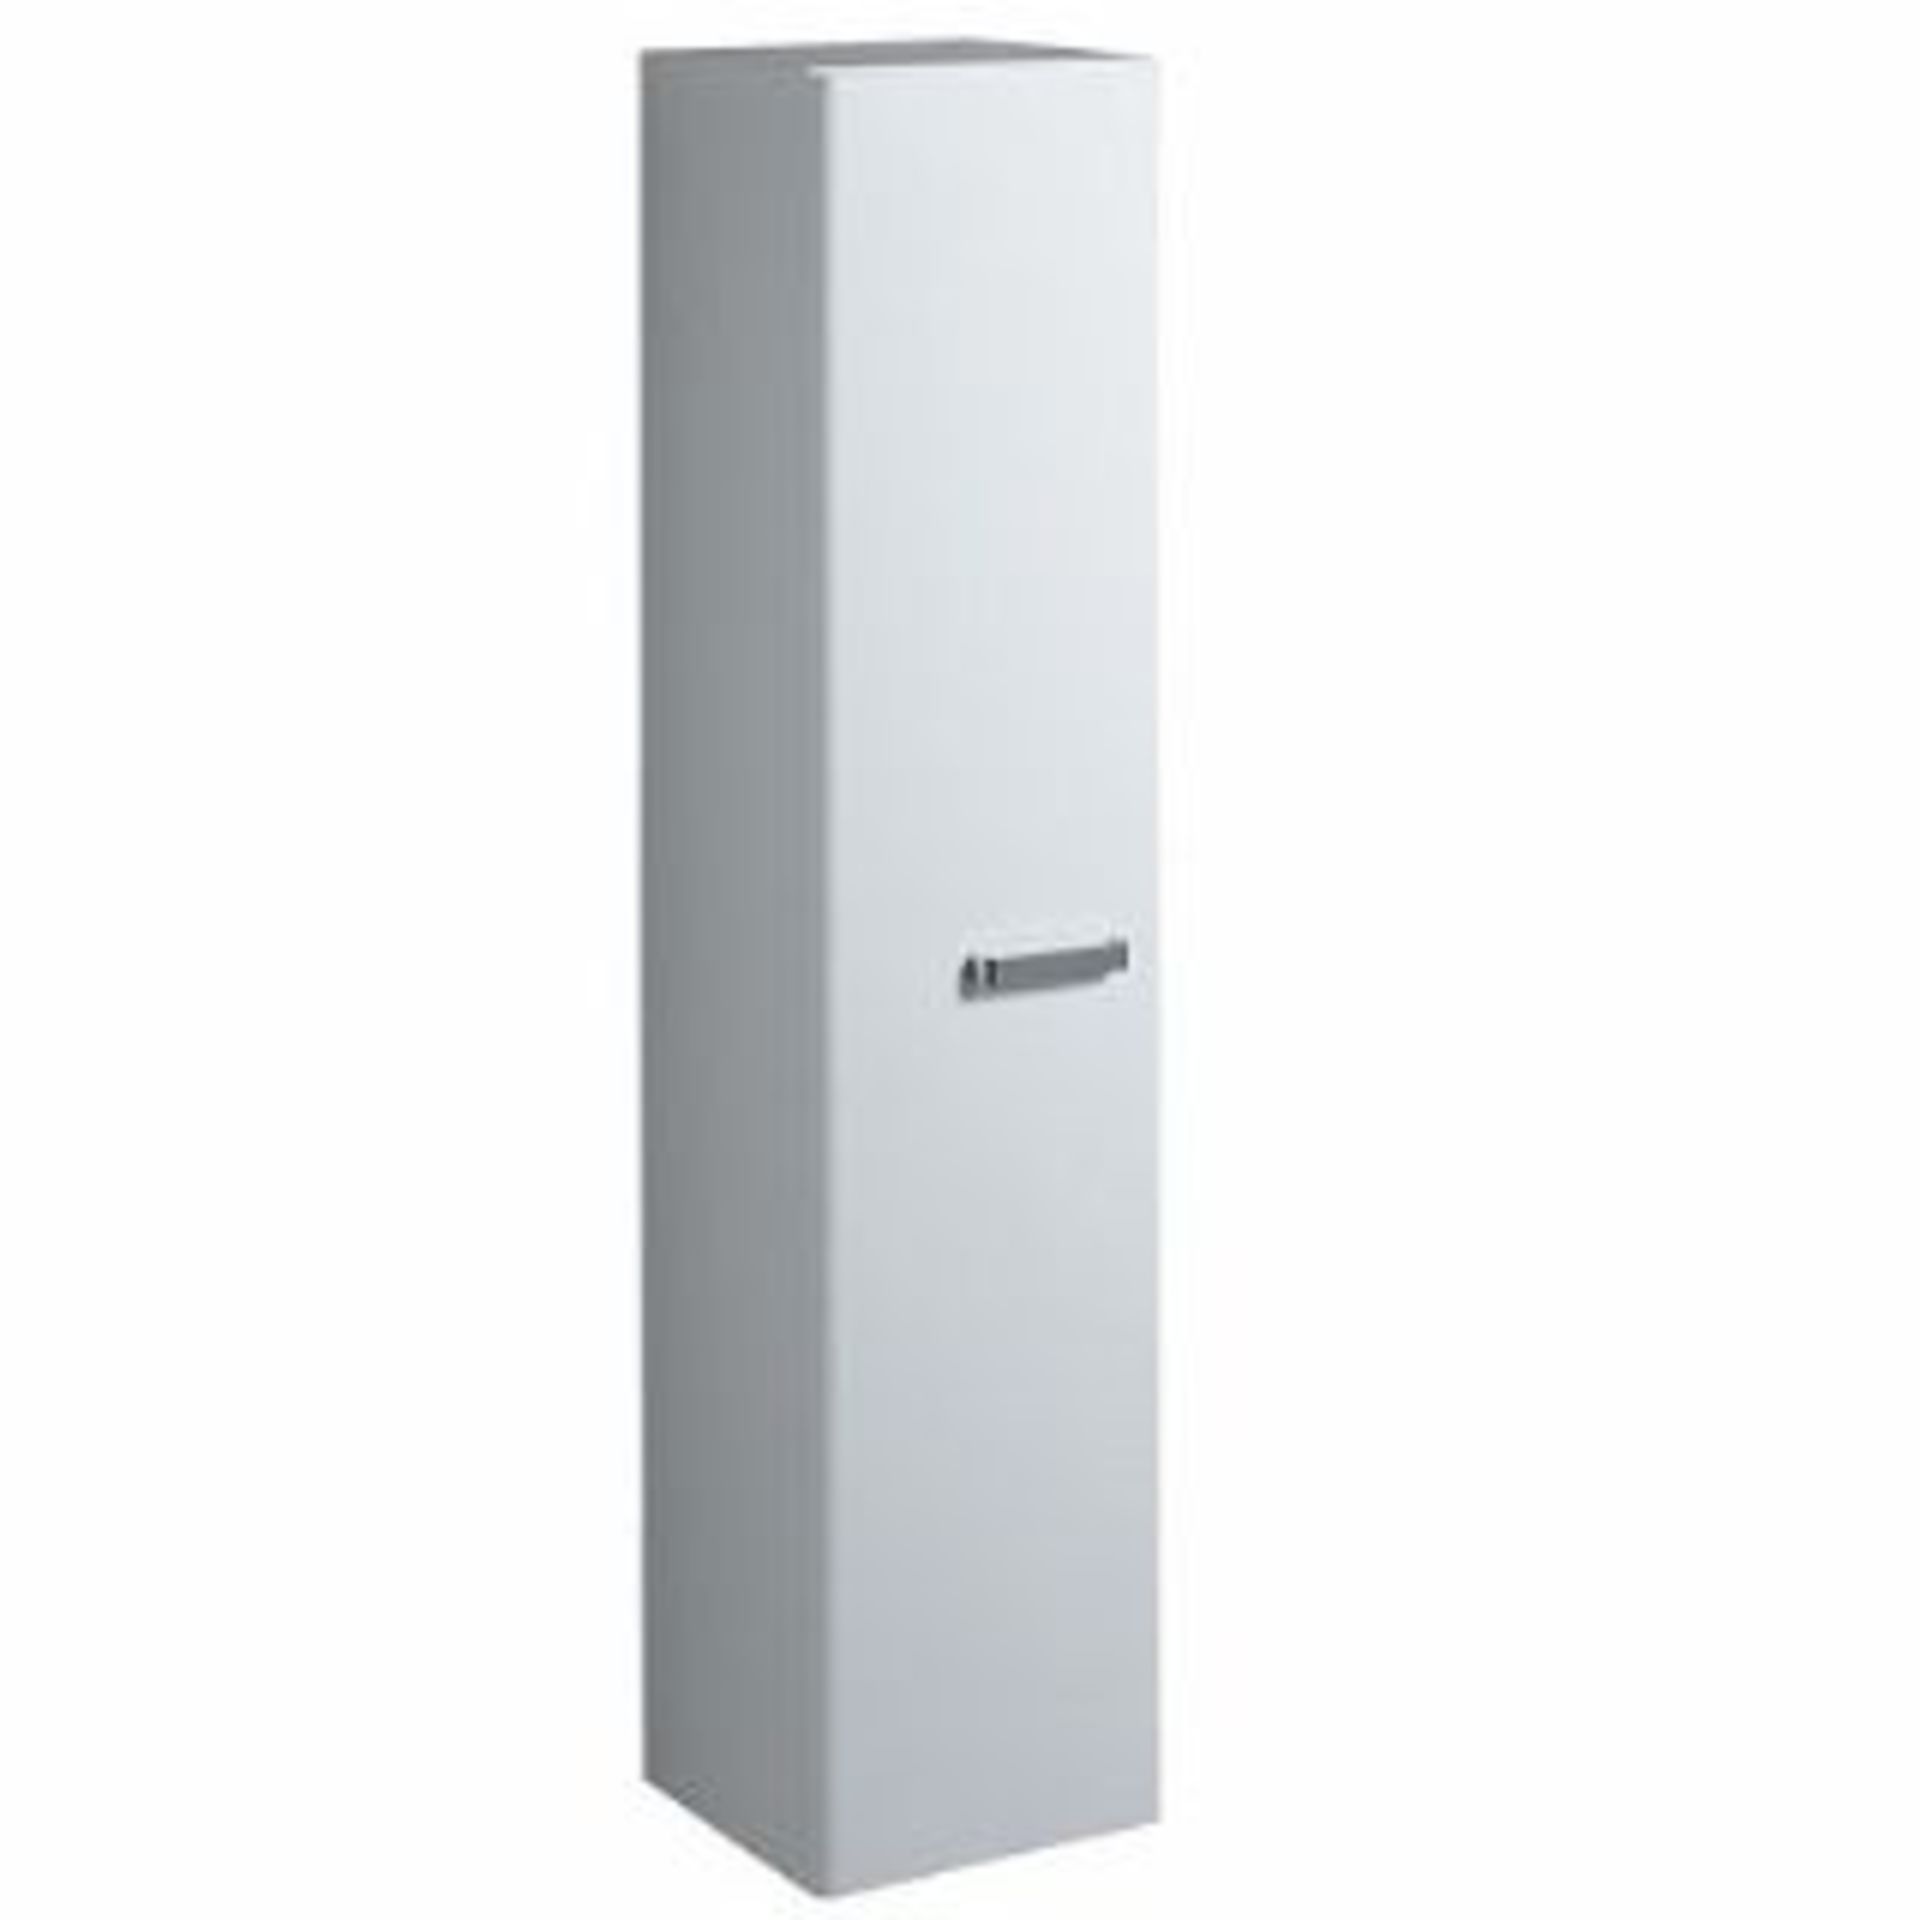 Brand New (DE100) Twyford 1730mm White Tall Furniture Unit. RRP £863.99. White gloss finish Wall mou